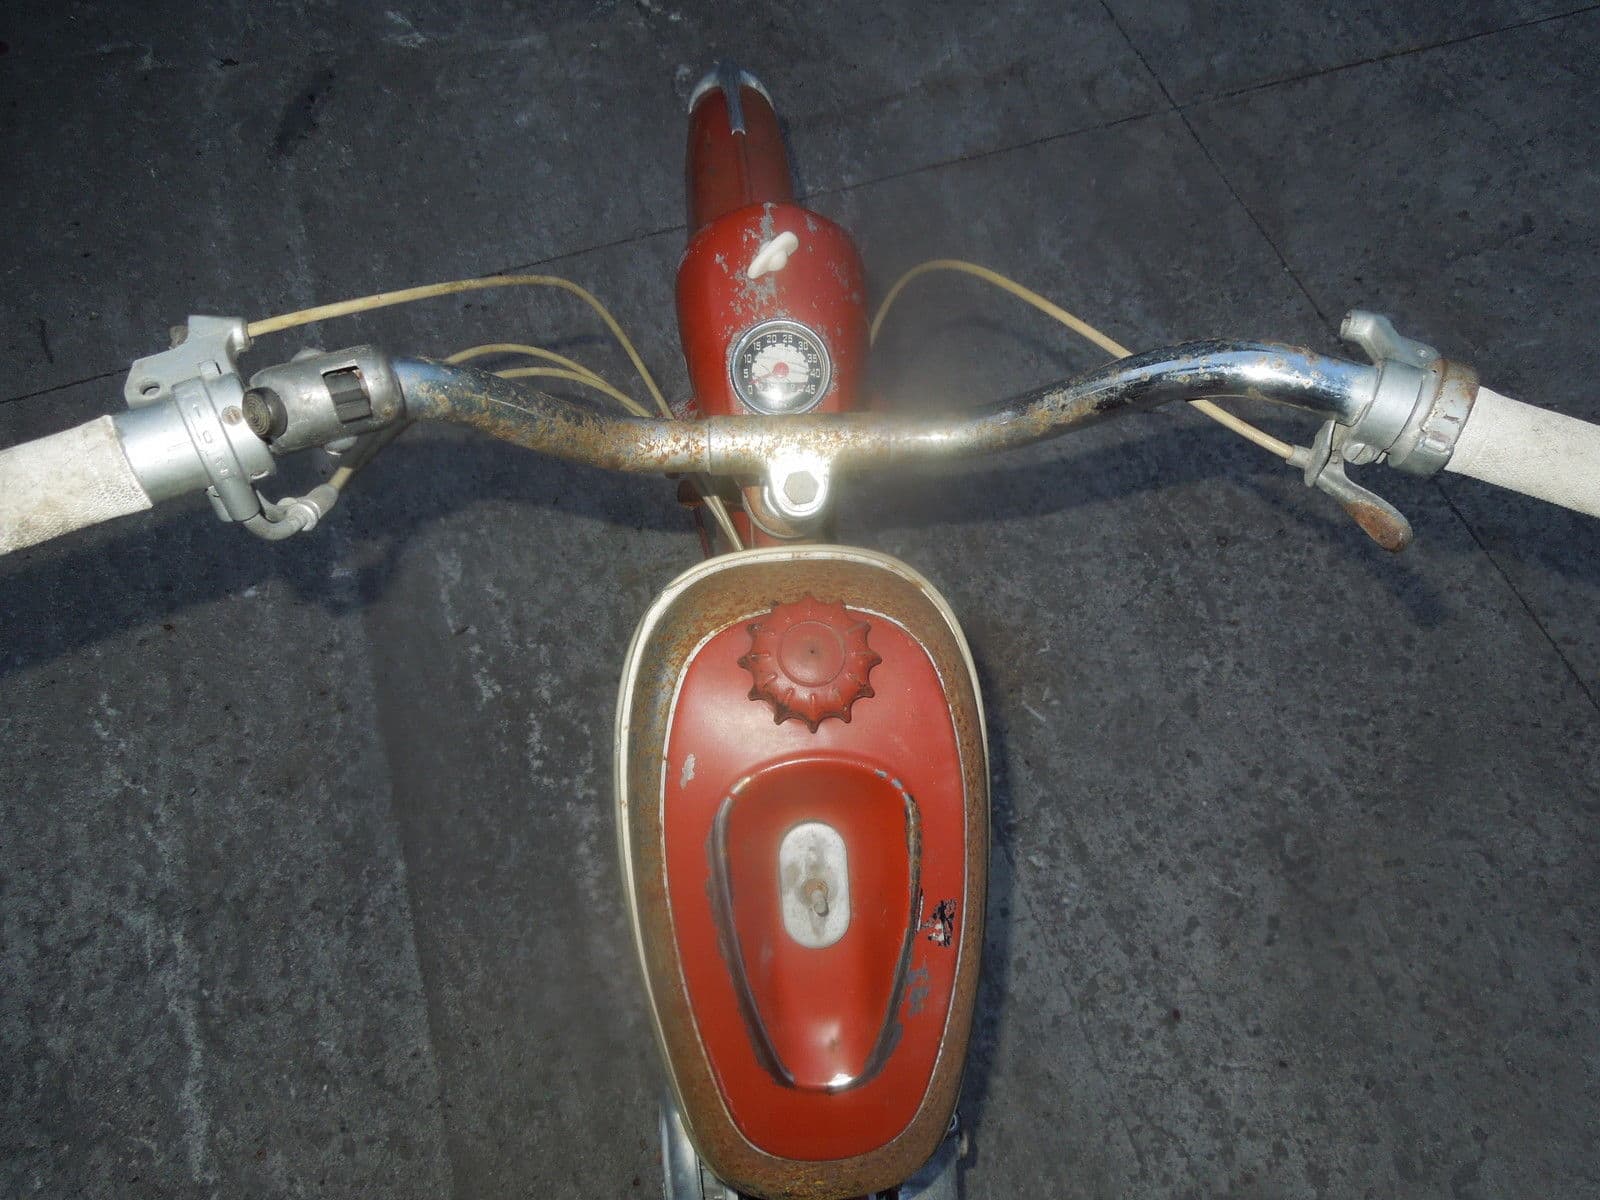 810.94250 Allstate Mo-Ped De Luxe Puch